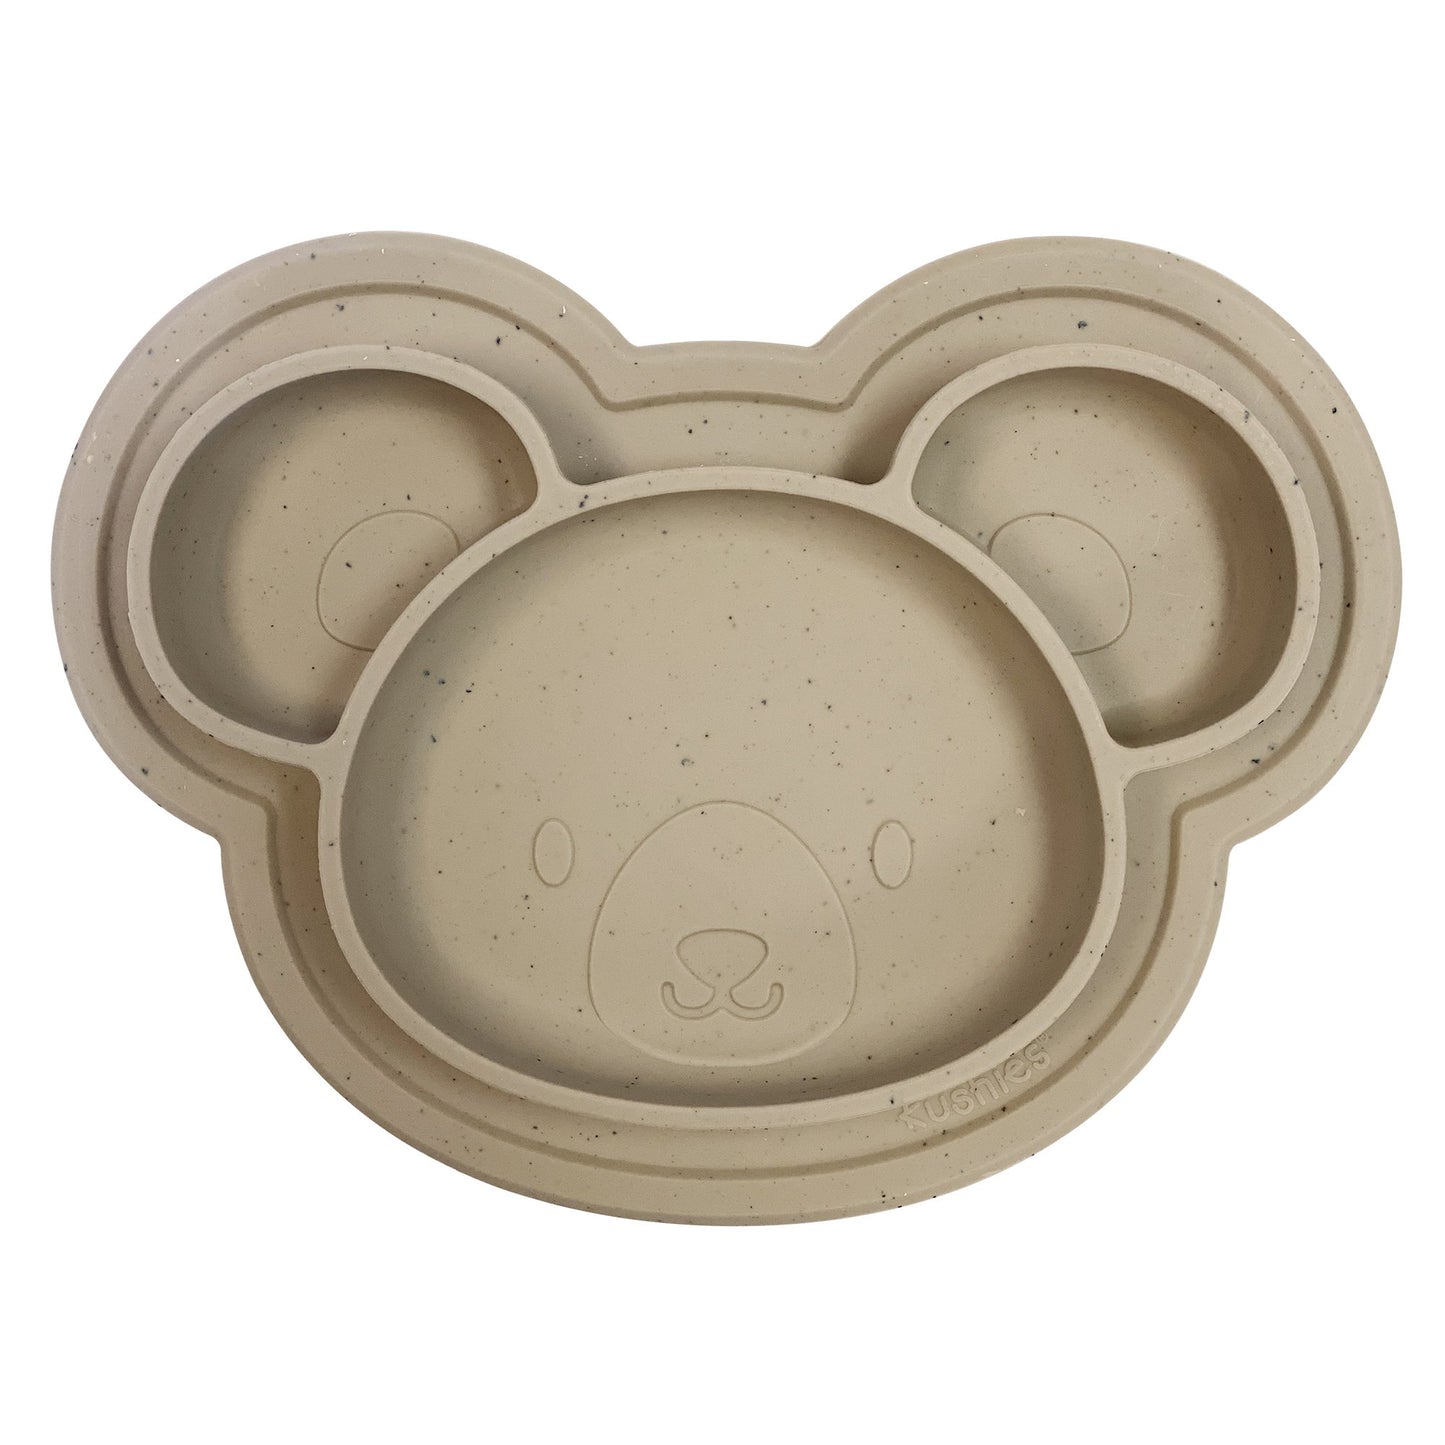 Assiette silicone -Kushies